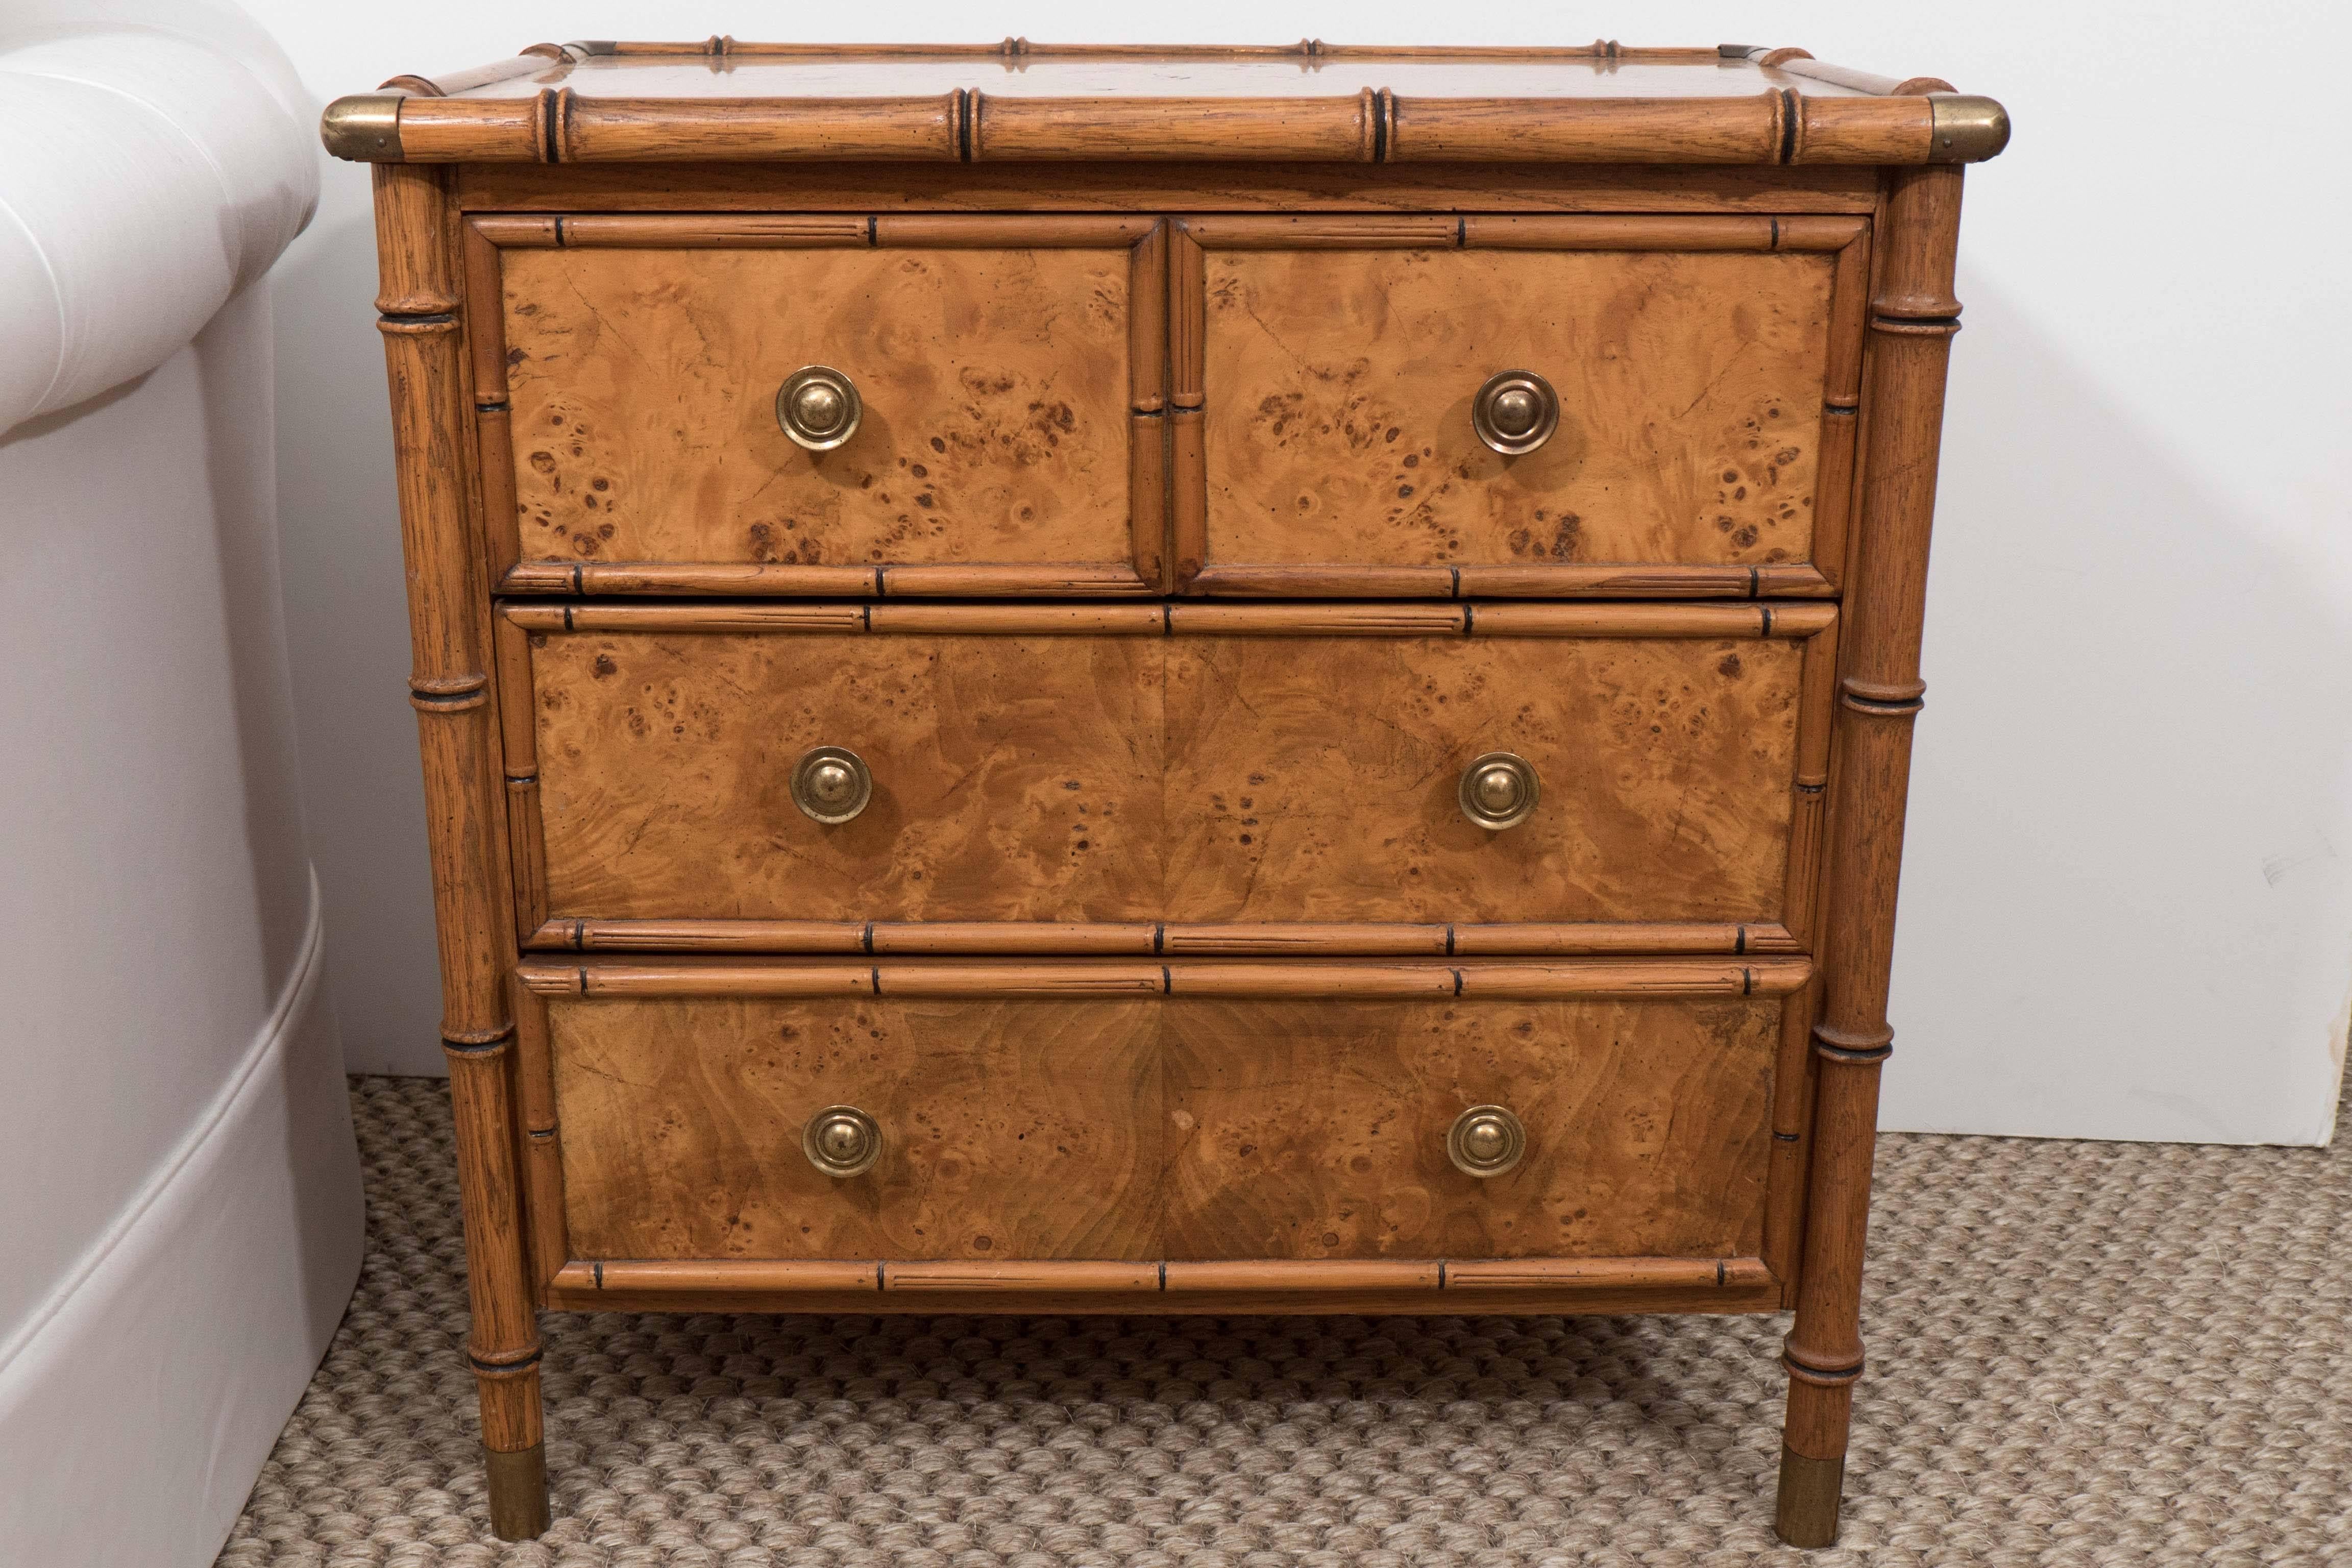 A great looking piece that could go anywhere--as a side table in a living room or study, bedside table, in an entrance, hallway or even a bathroom. This chest was made by Hekman, the Michigan company founded in 1922.  Constructed in oak with burled